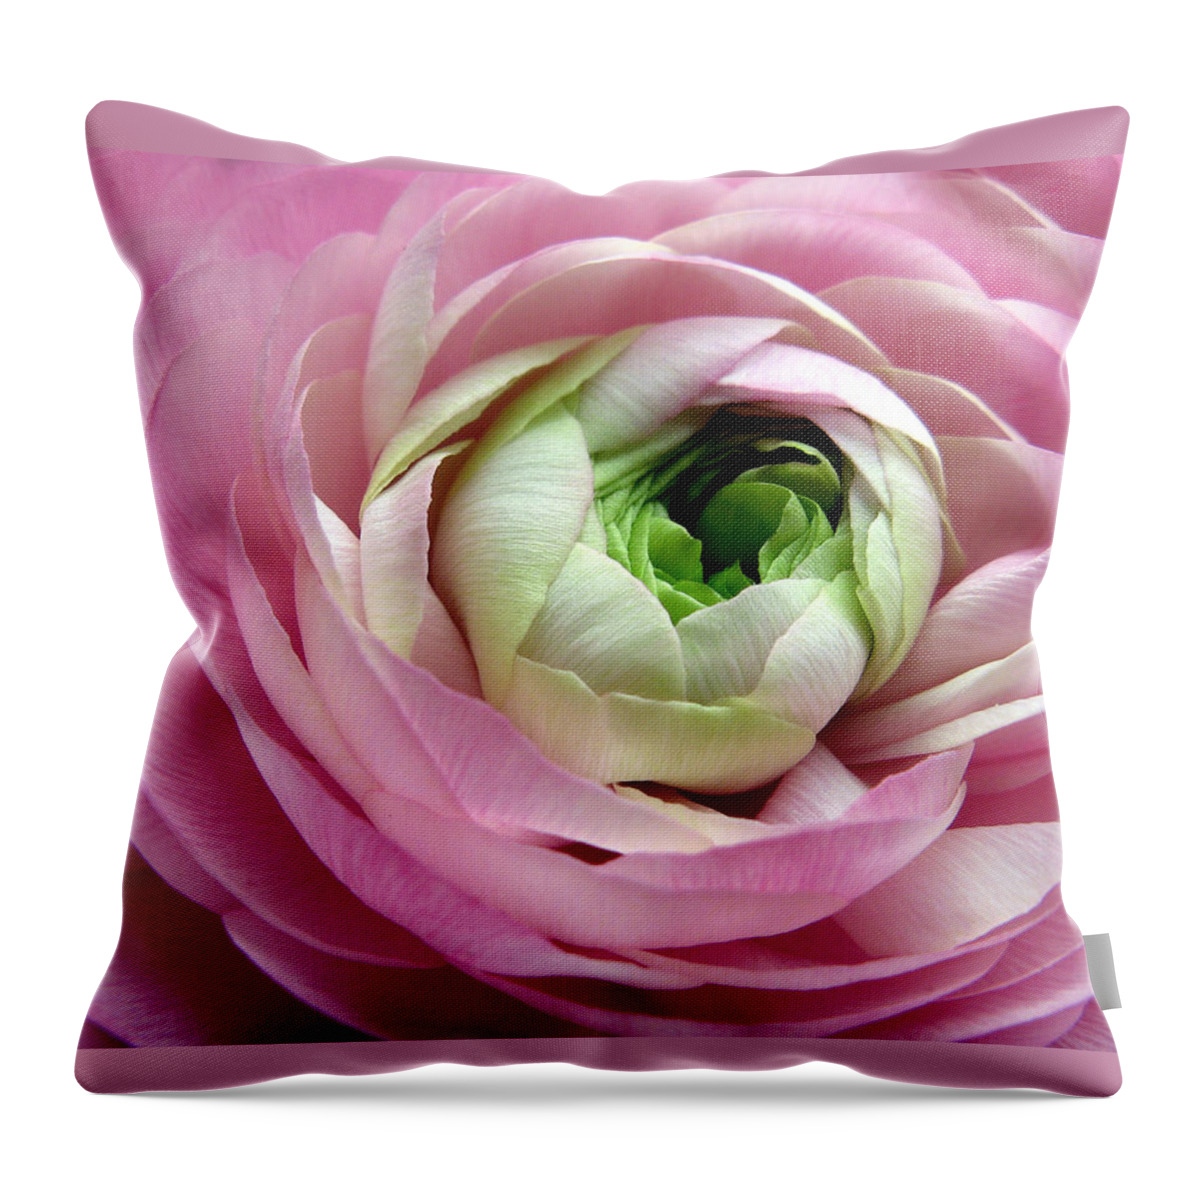 Flowers Throw Pillow featuring the photograph Pink Petticoat by Jessica Jenney